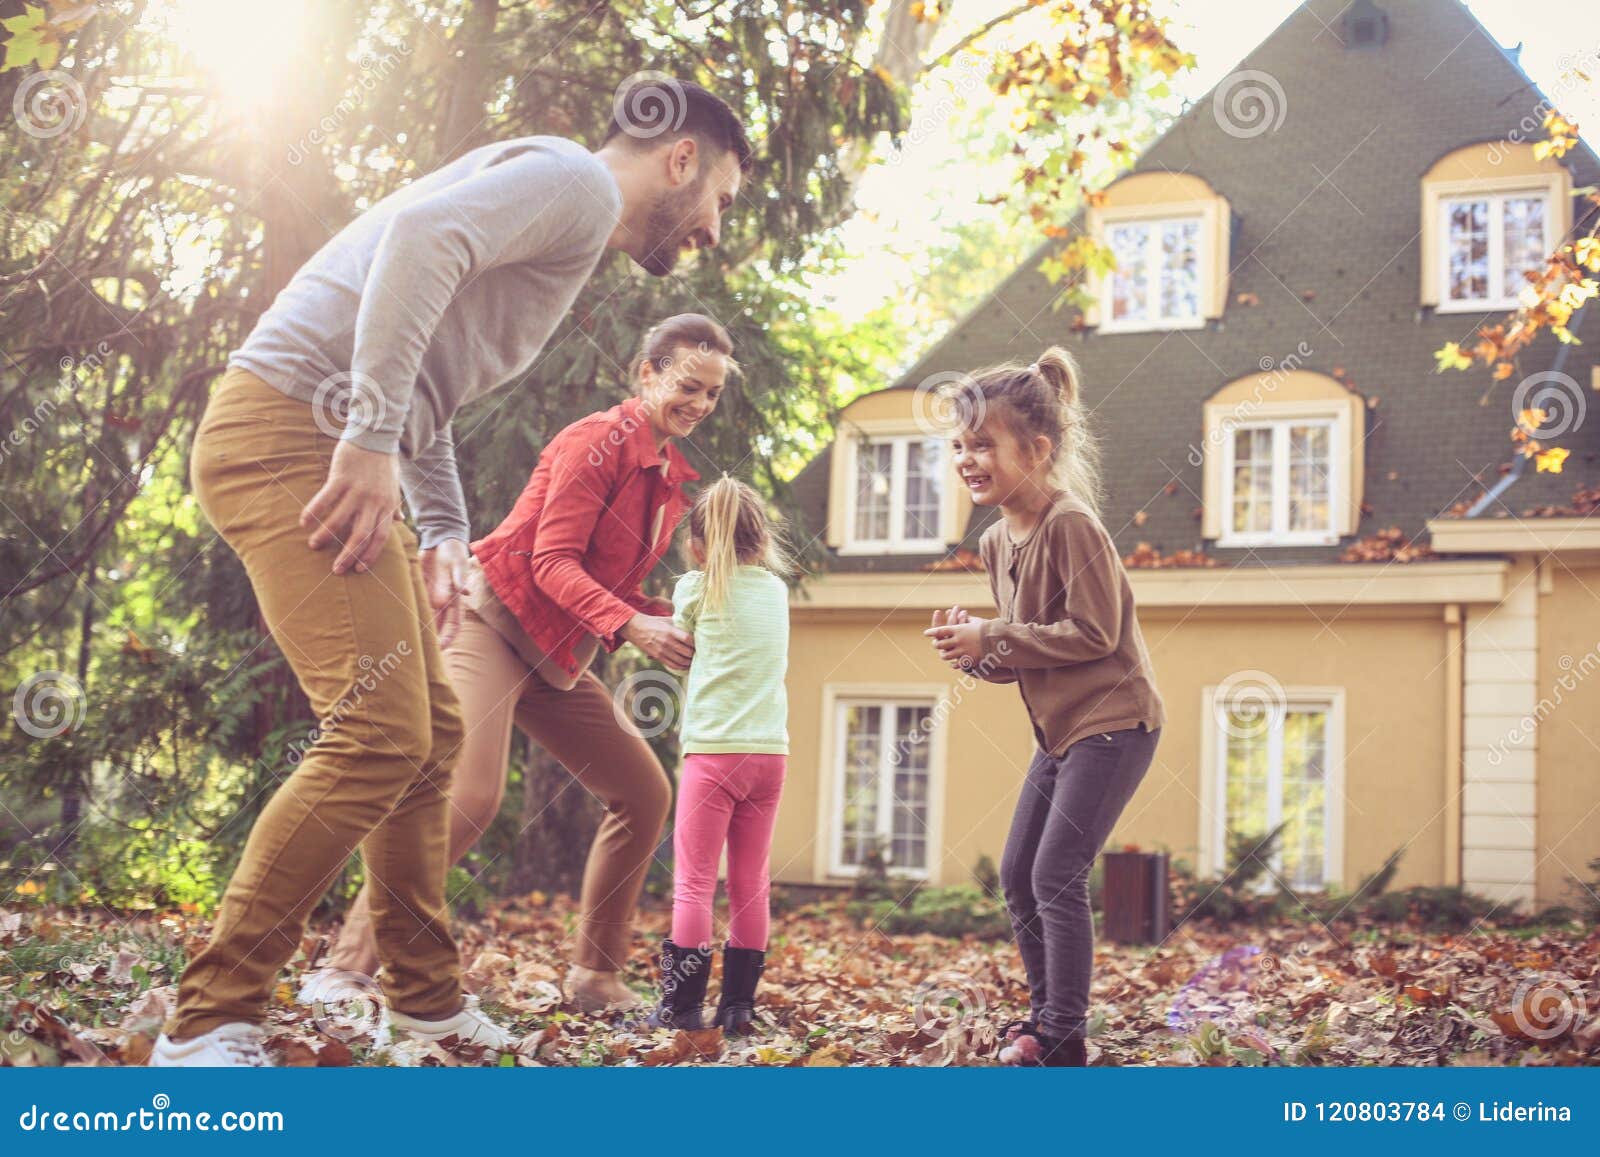 Family Have Fun Together At Backyard On The Move Stock Photo Image Of Children